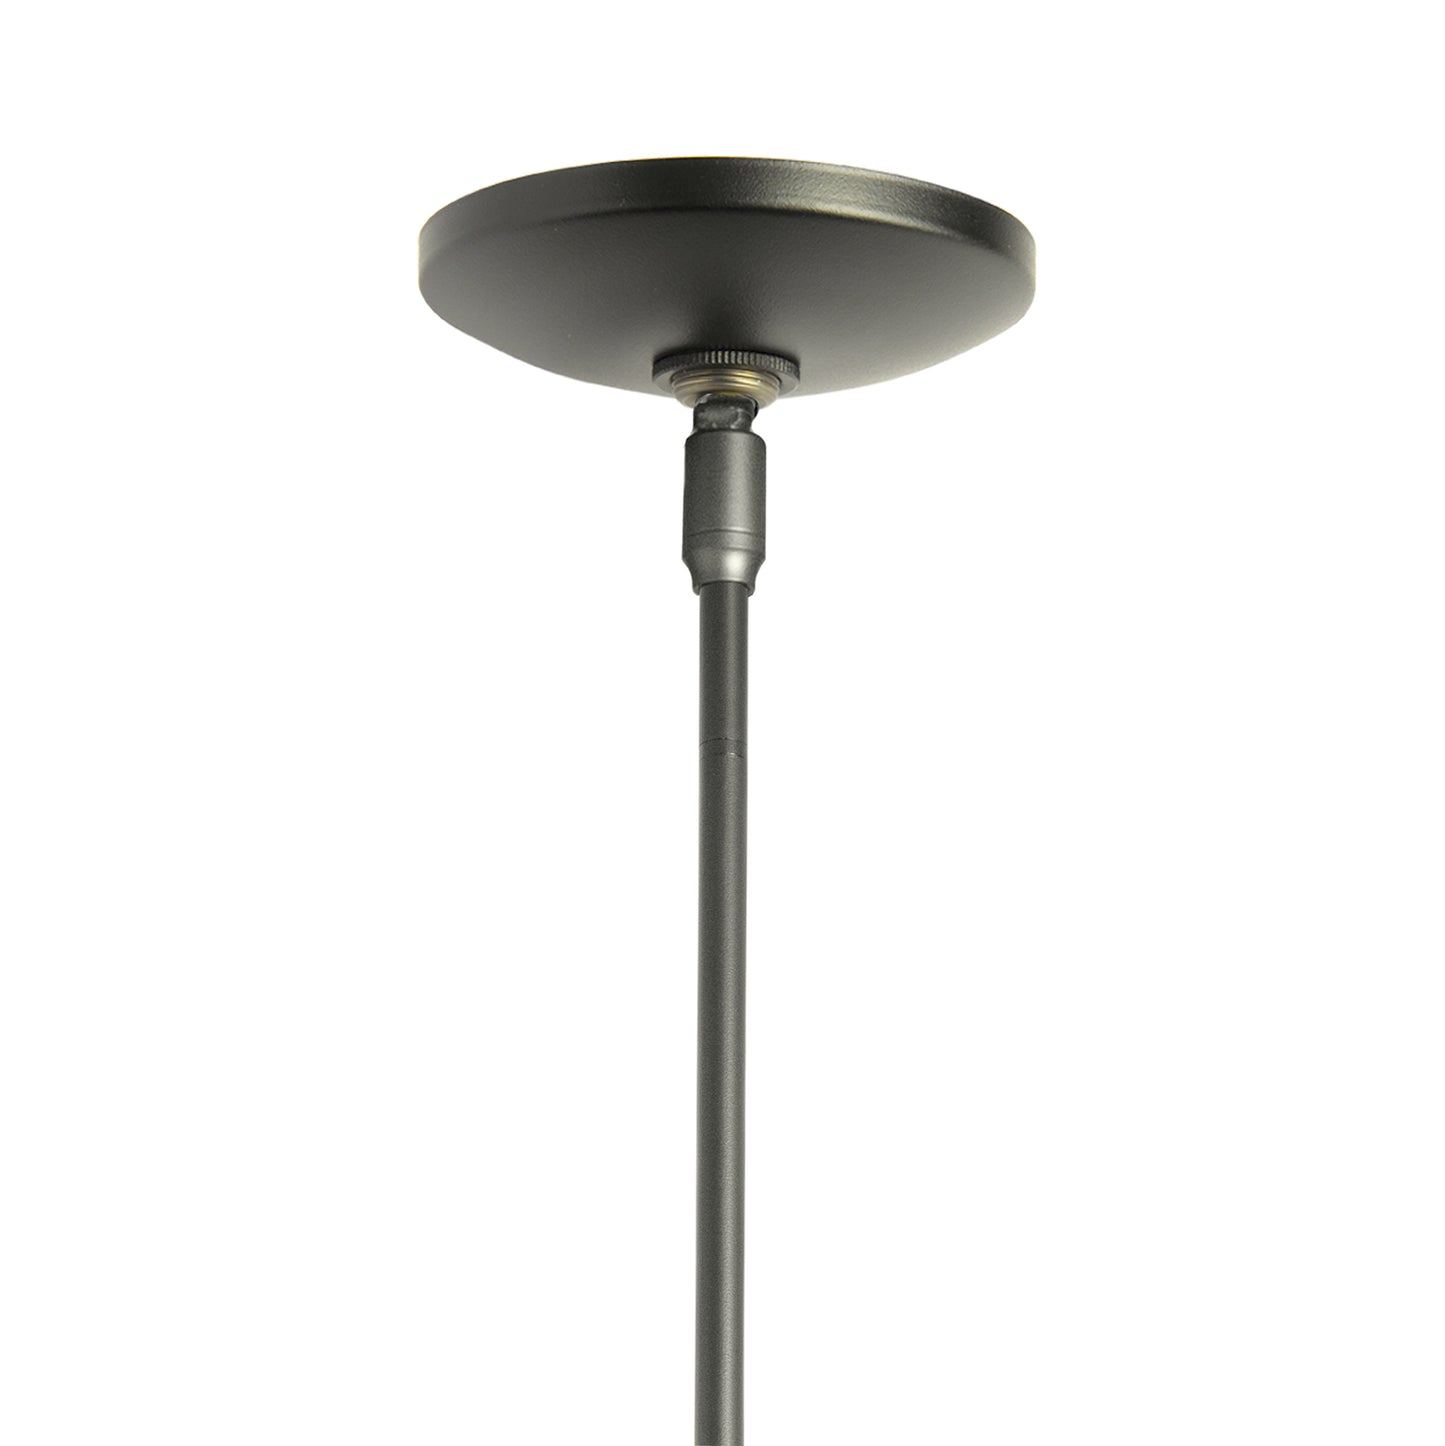 A handmade Brindille Mini Pendant with a black shade from Hubbardton Forge lighting.